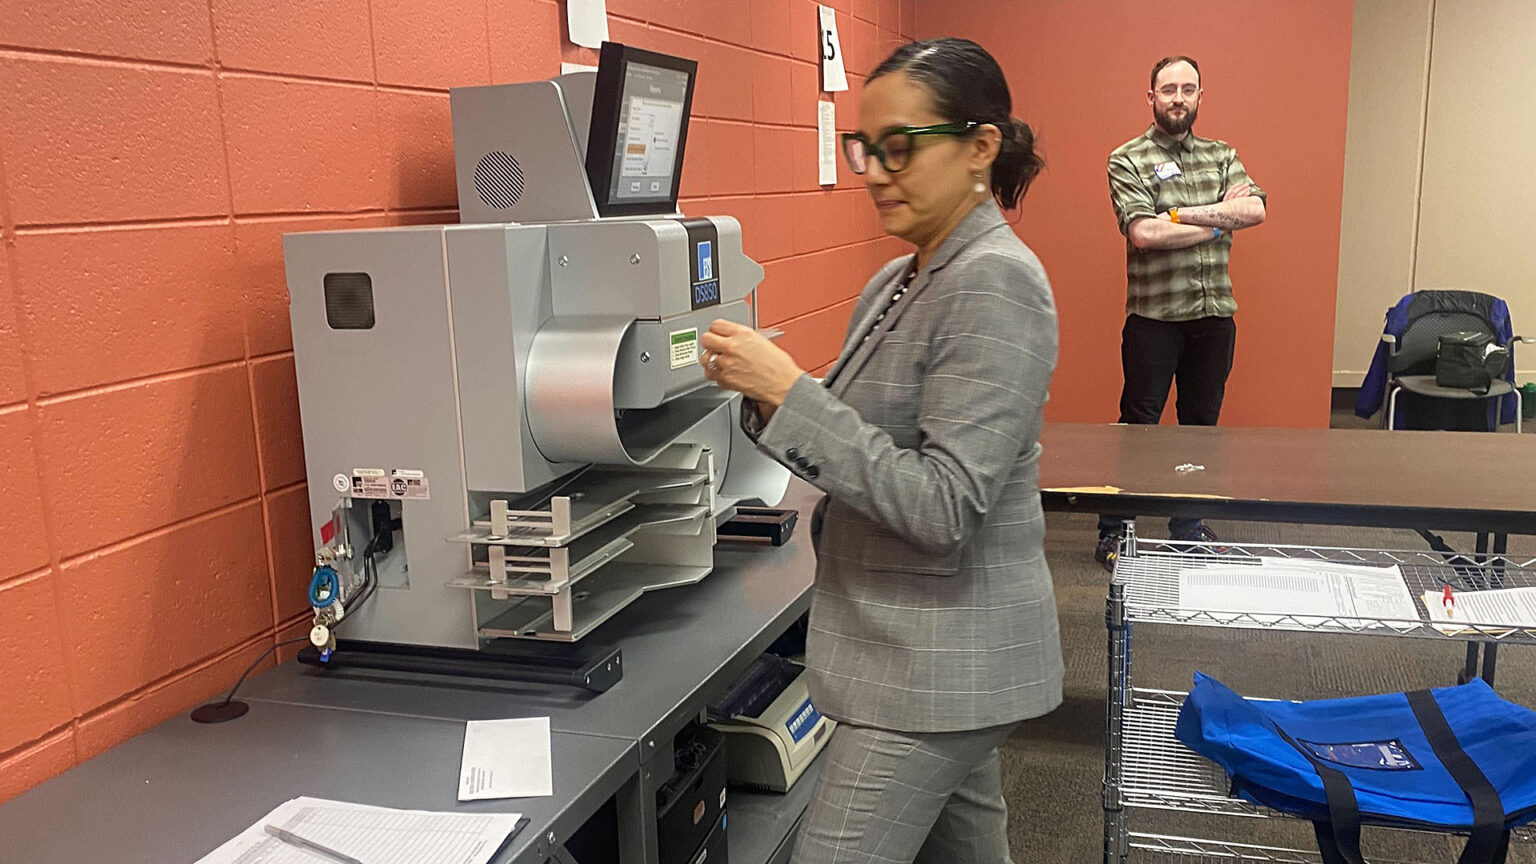 Paulina Gutierrez stands in front of a ballot tabulator machine placed on top a table, with another person standing in the background with crossed arms and wearing a disposable nametag near a chair with a jacket draped over its back, in a room with painted concrete block walls.